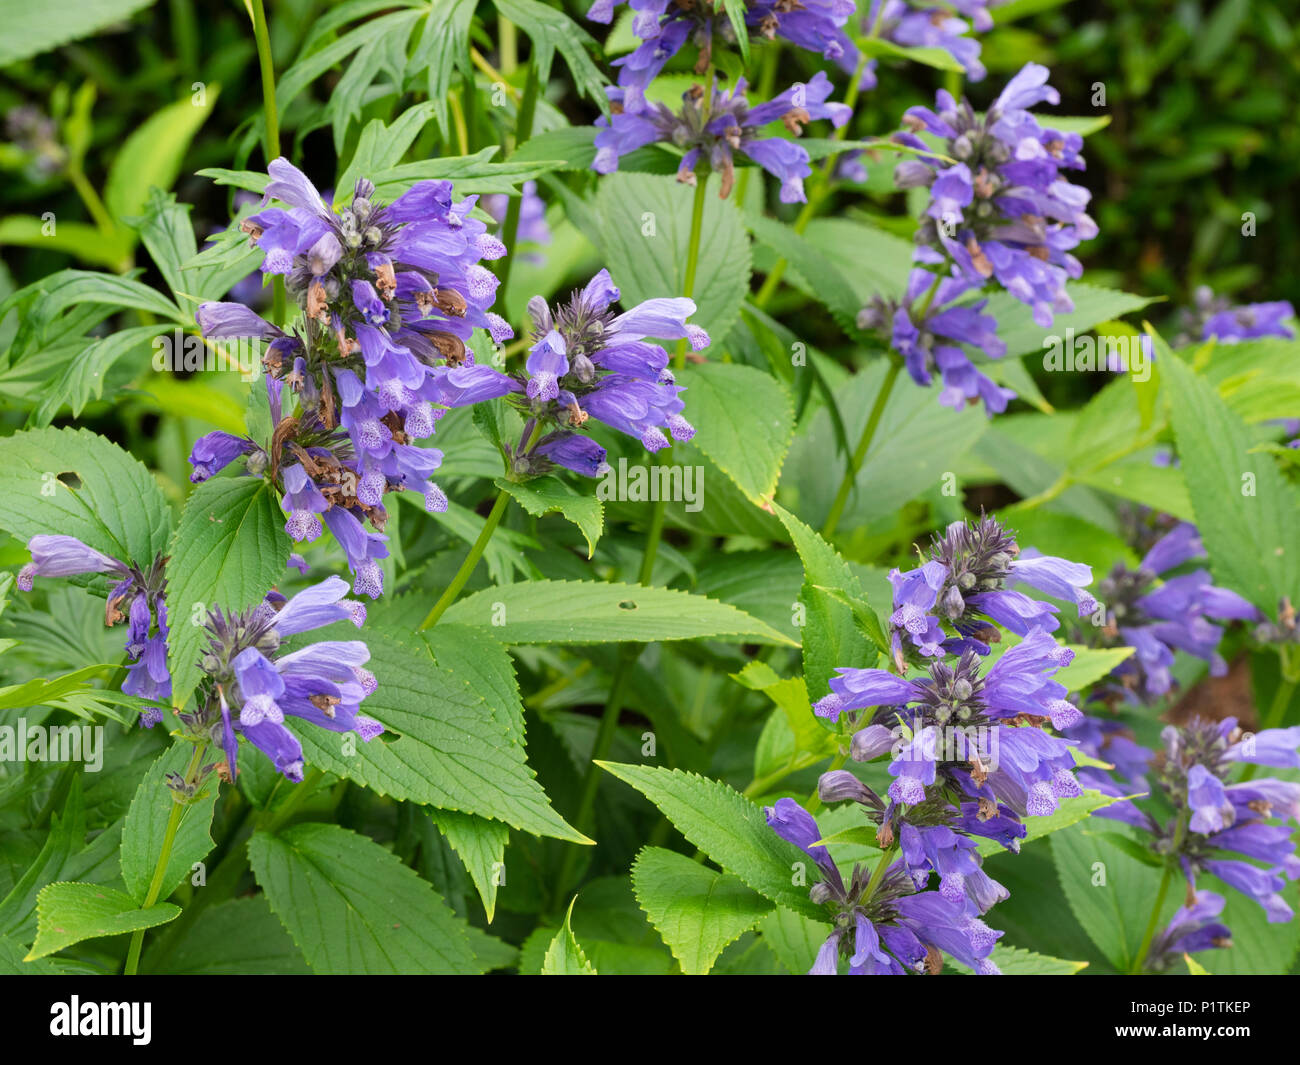 Blue summer flowers in stubby spikes of the hardy perennial, Nepeta subsessilis 'Washfield' Stock Photo